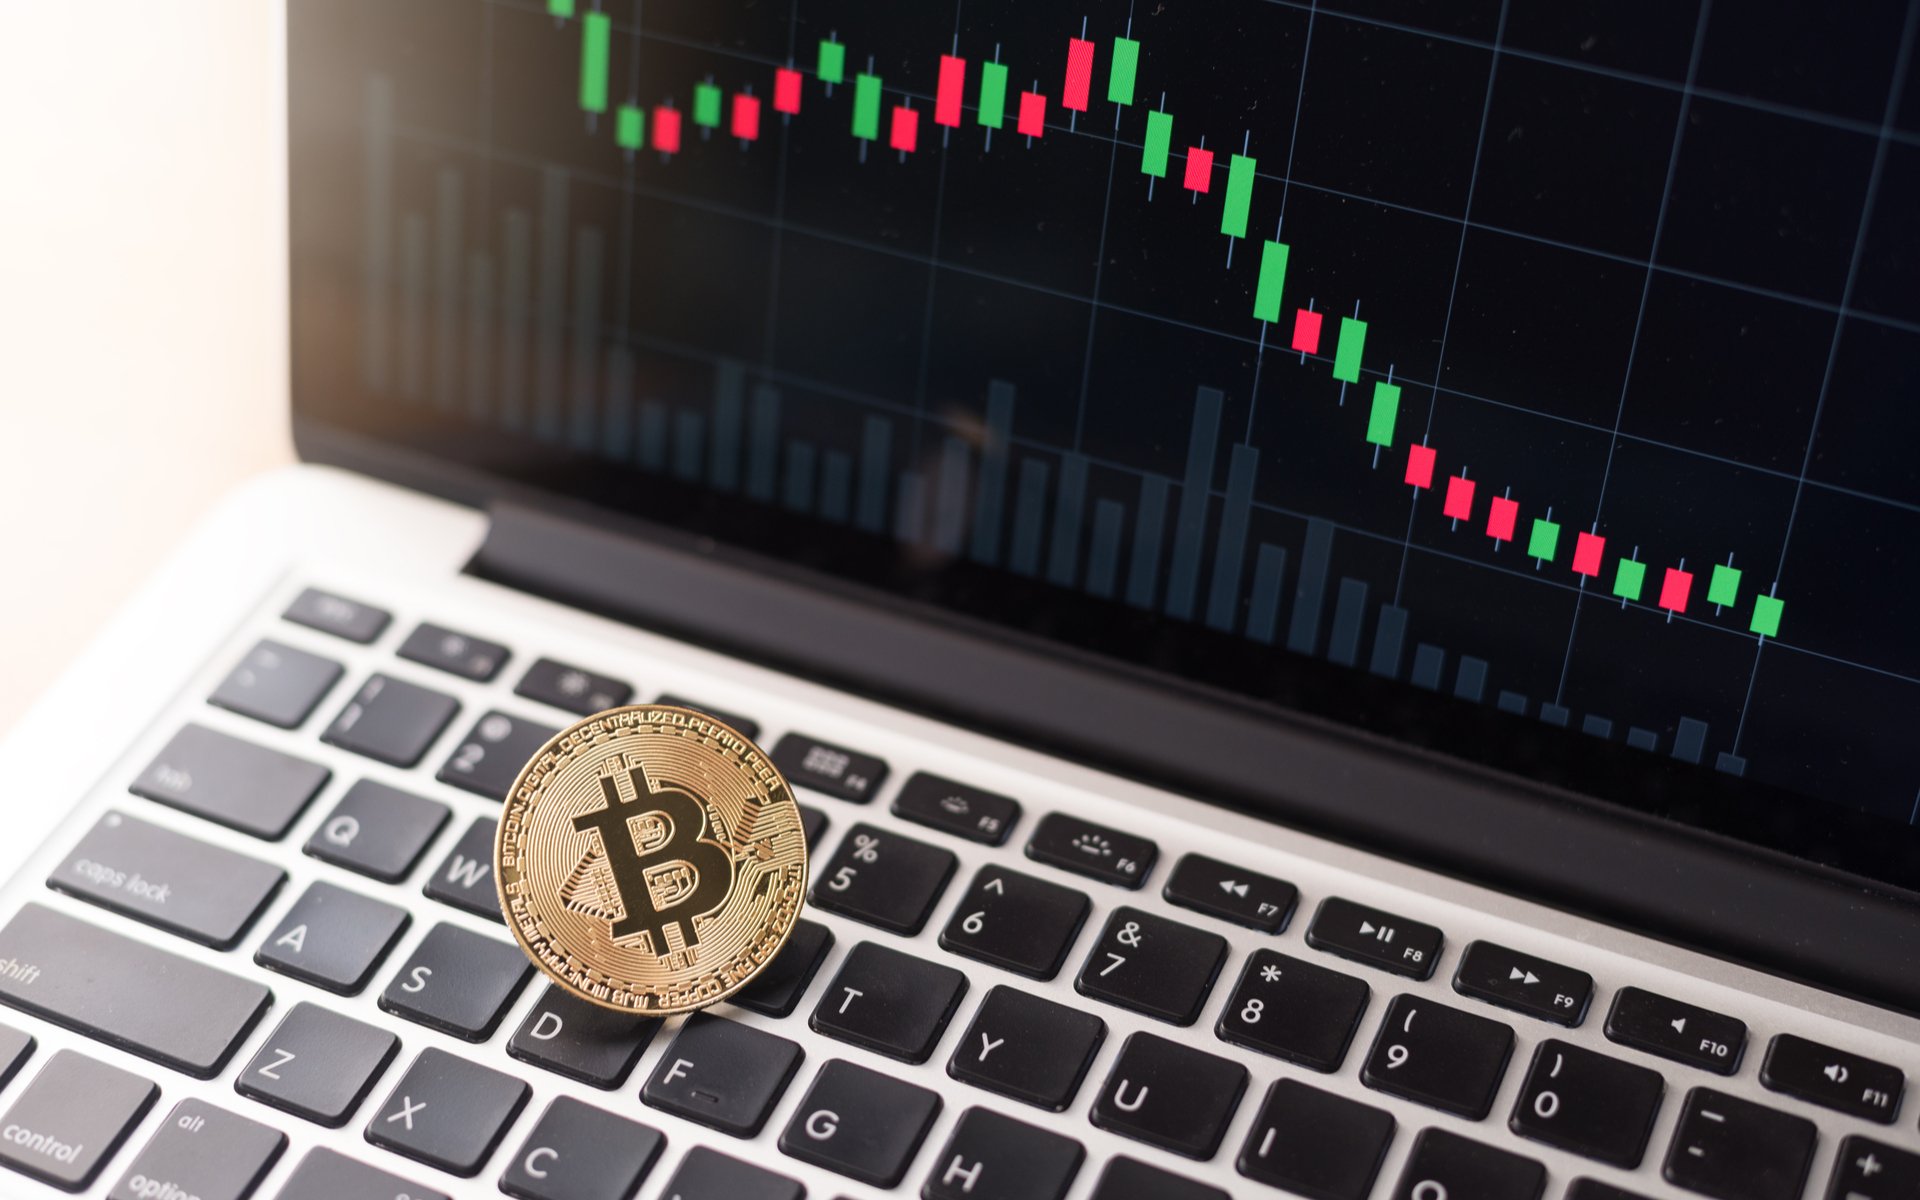 Bitcoin Price Drop To $3200 Would Still Continue Uptrend, Fundstrat Confirms